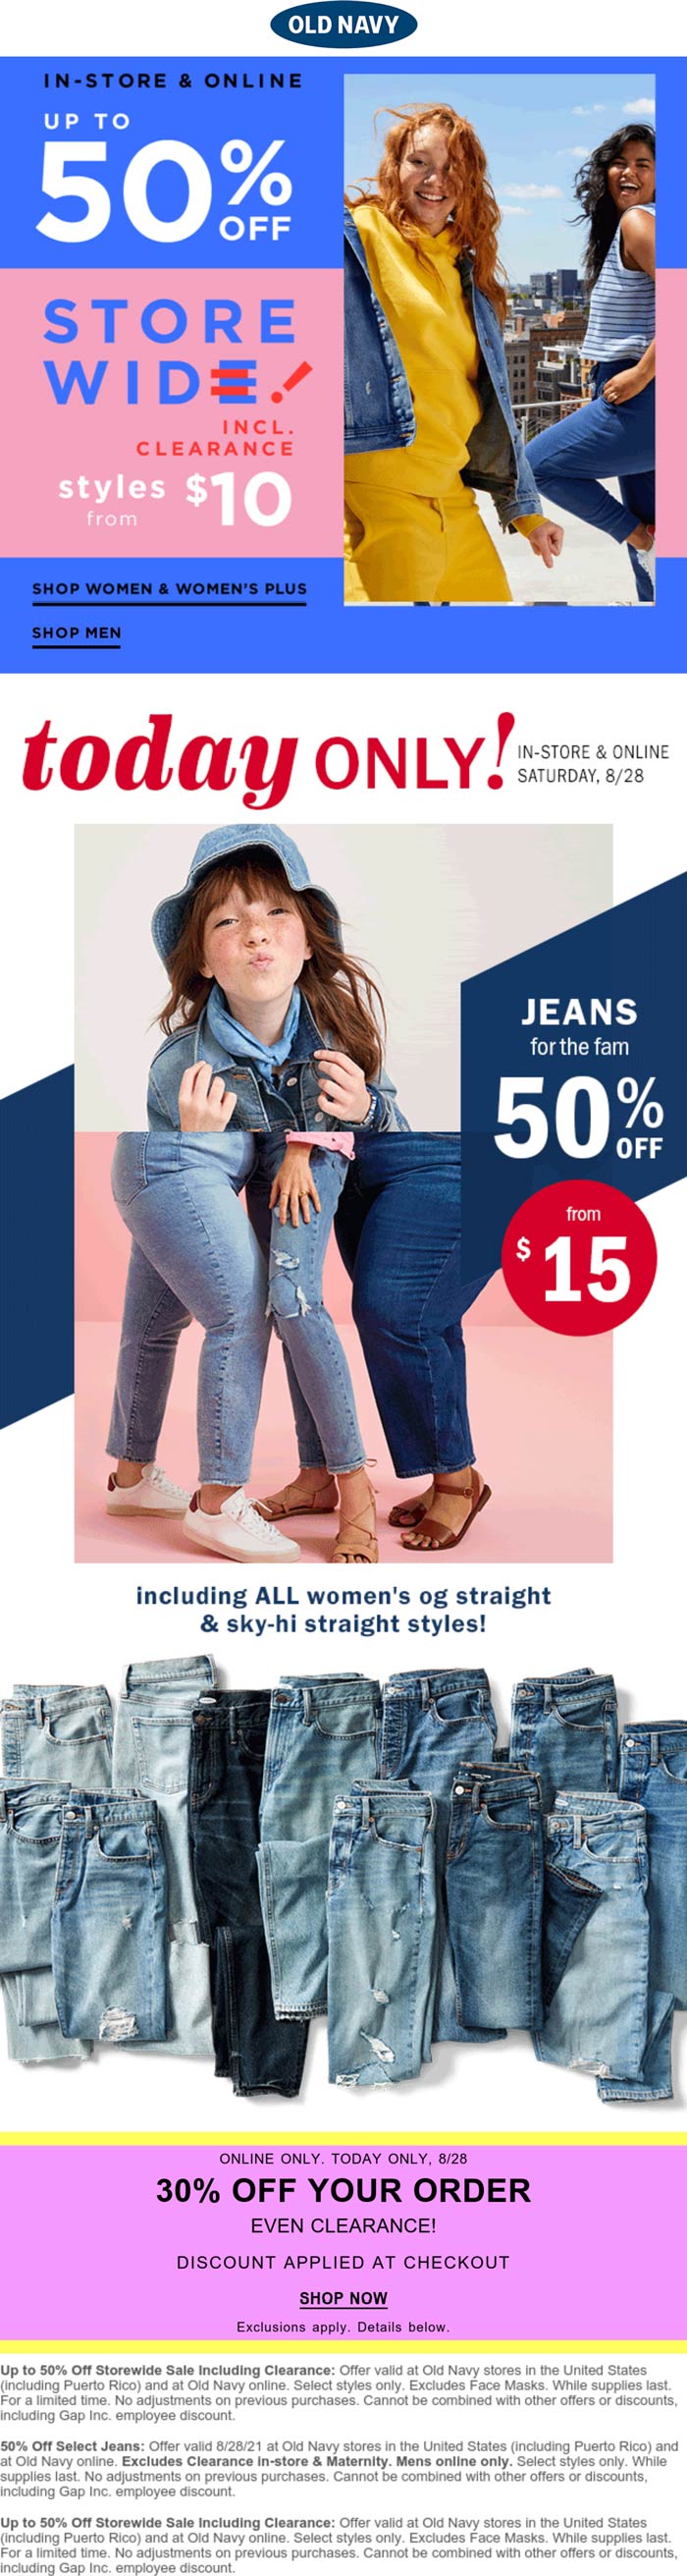 Old Navy stores Coupon  50% off jeans & more today at Old Navy #oldnavy 